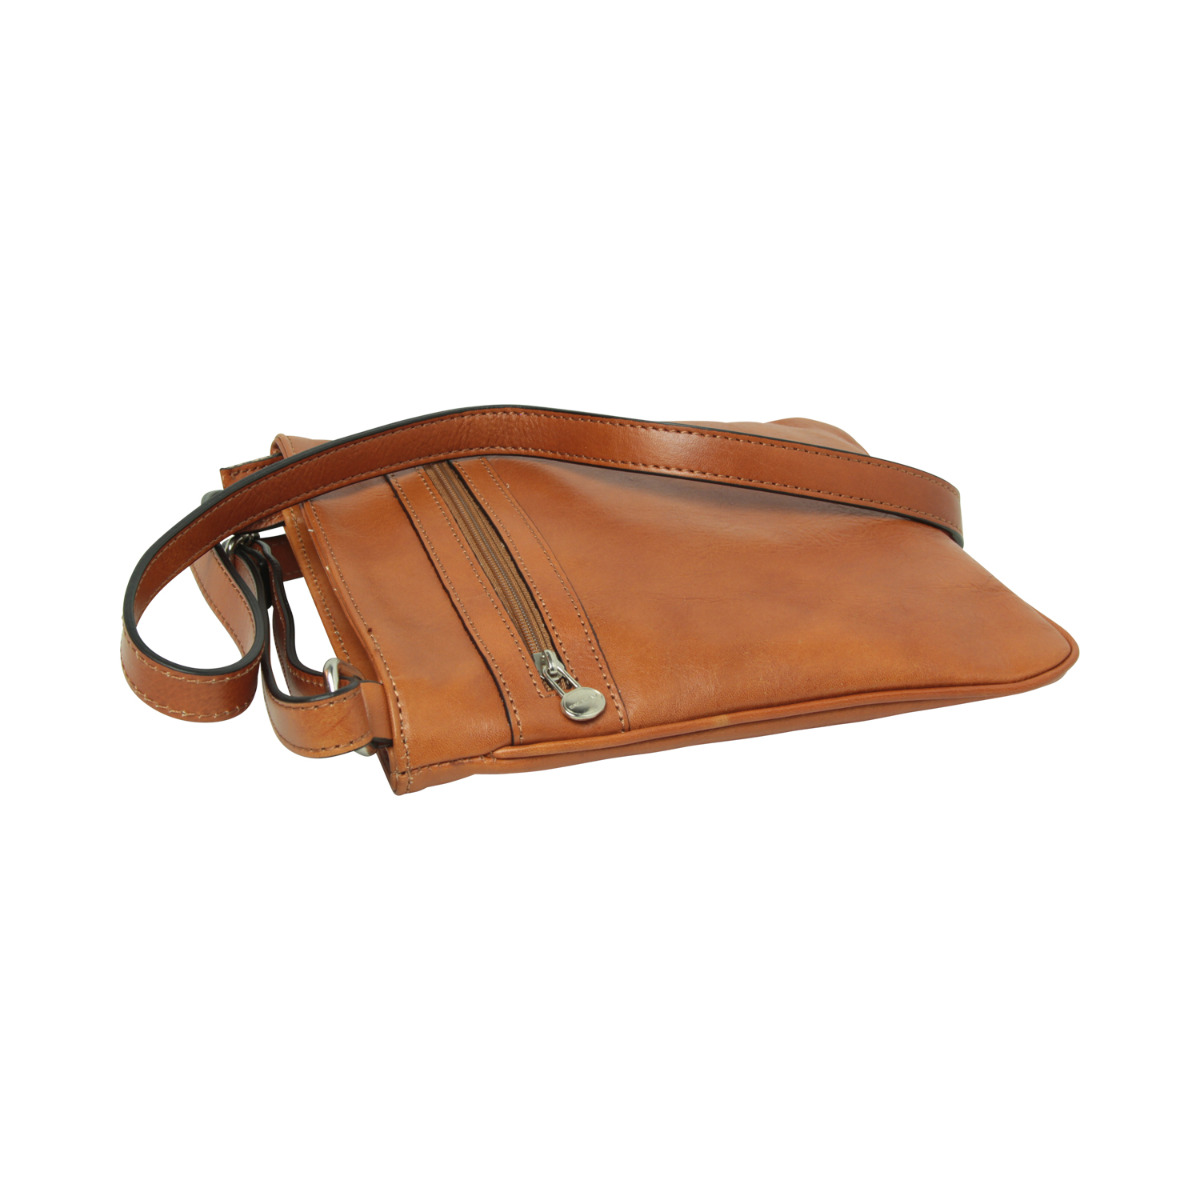 Leather Cross Body Bag with zip pocket - Brown | 074105MA US | Old Angler Firenze